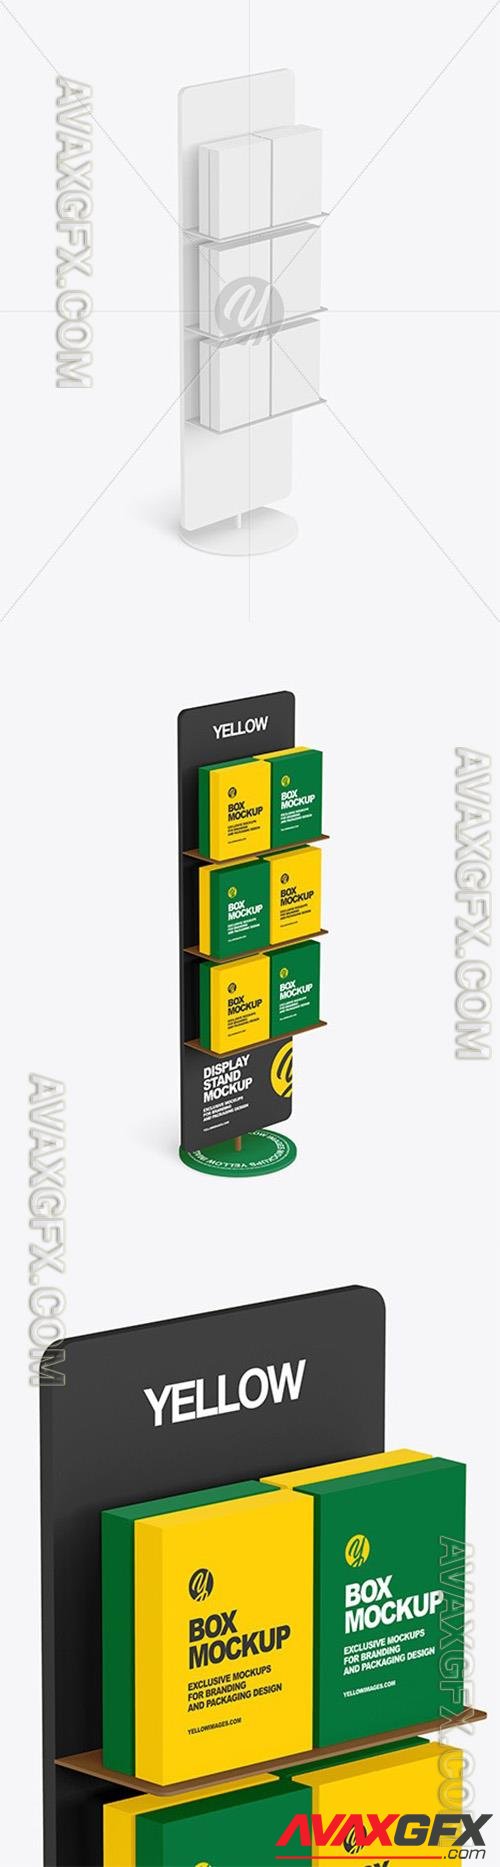 Display Stand With Boxes Mockup 97125 TIF